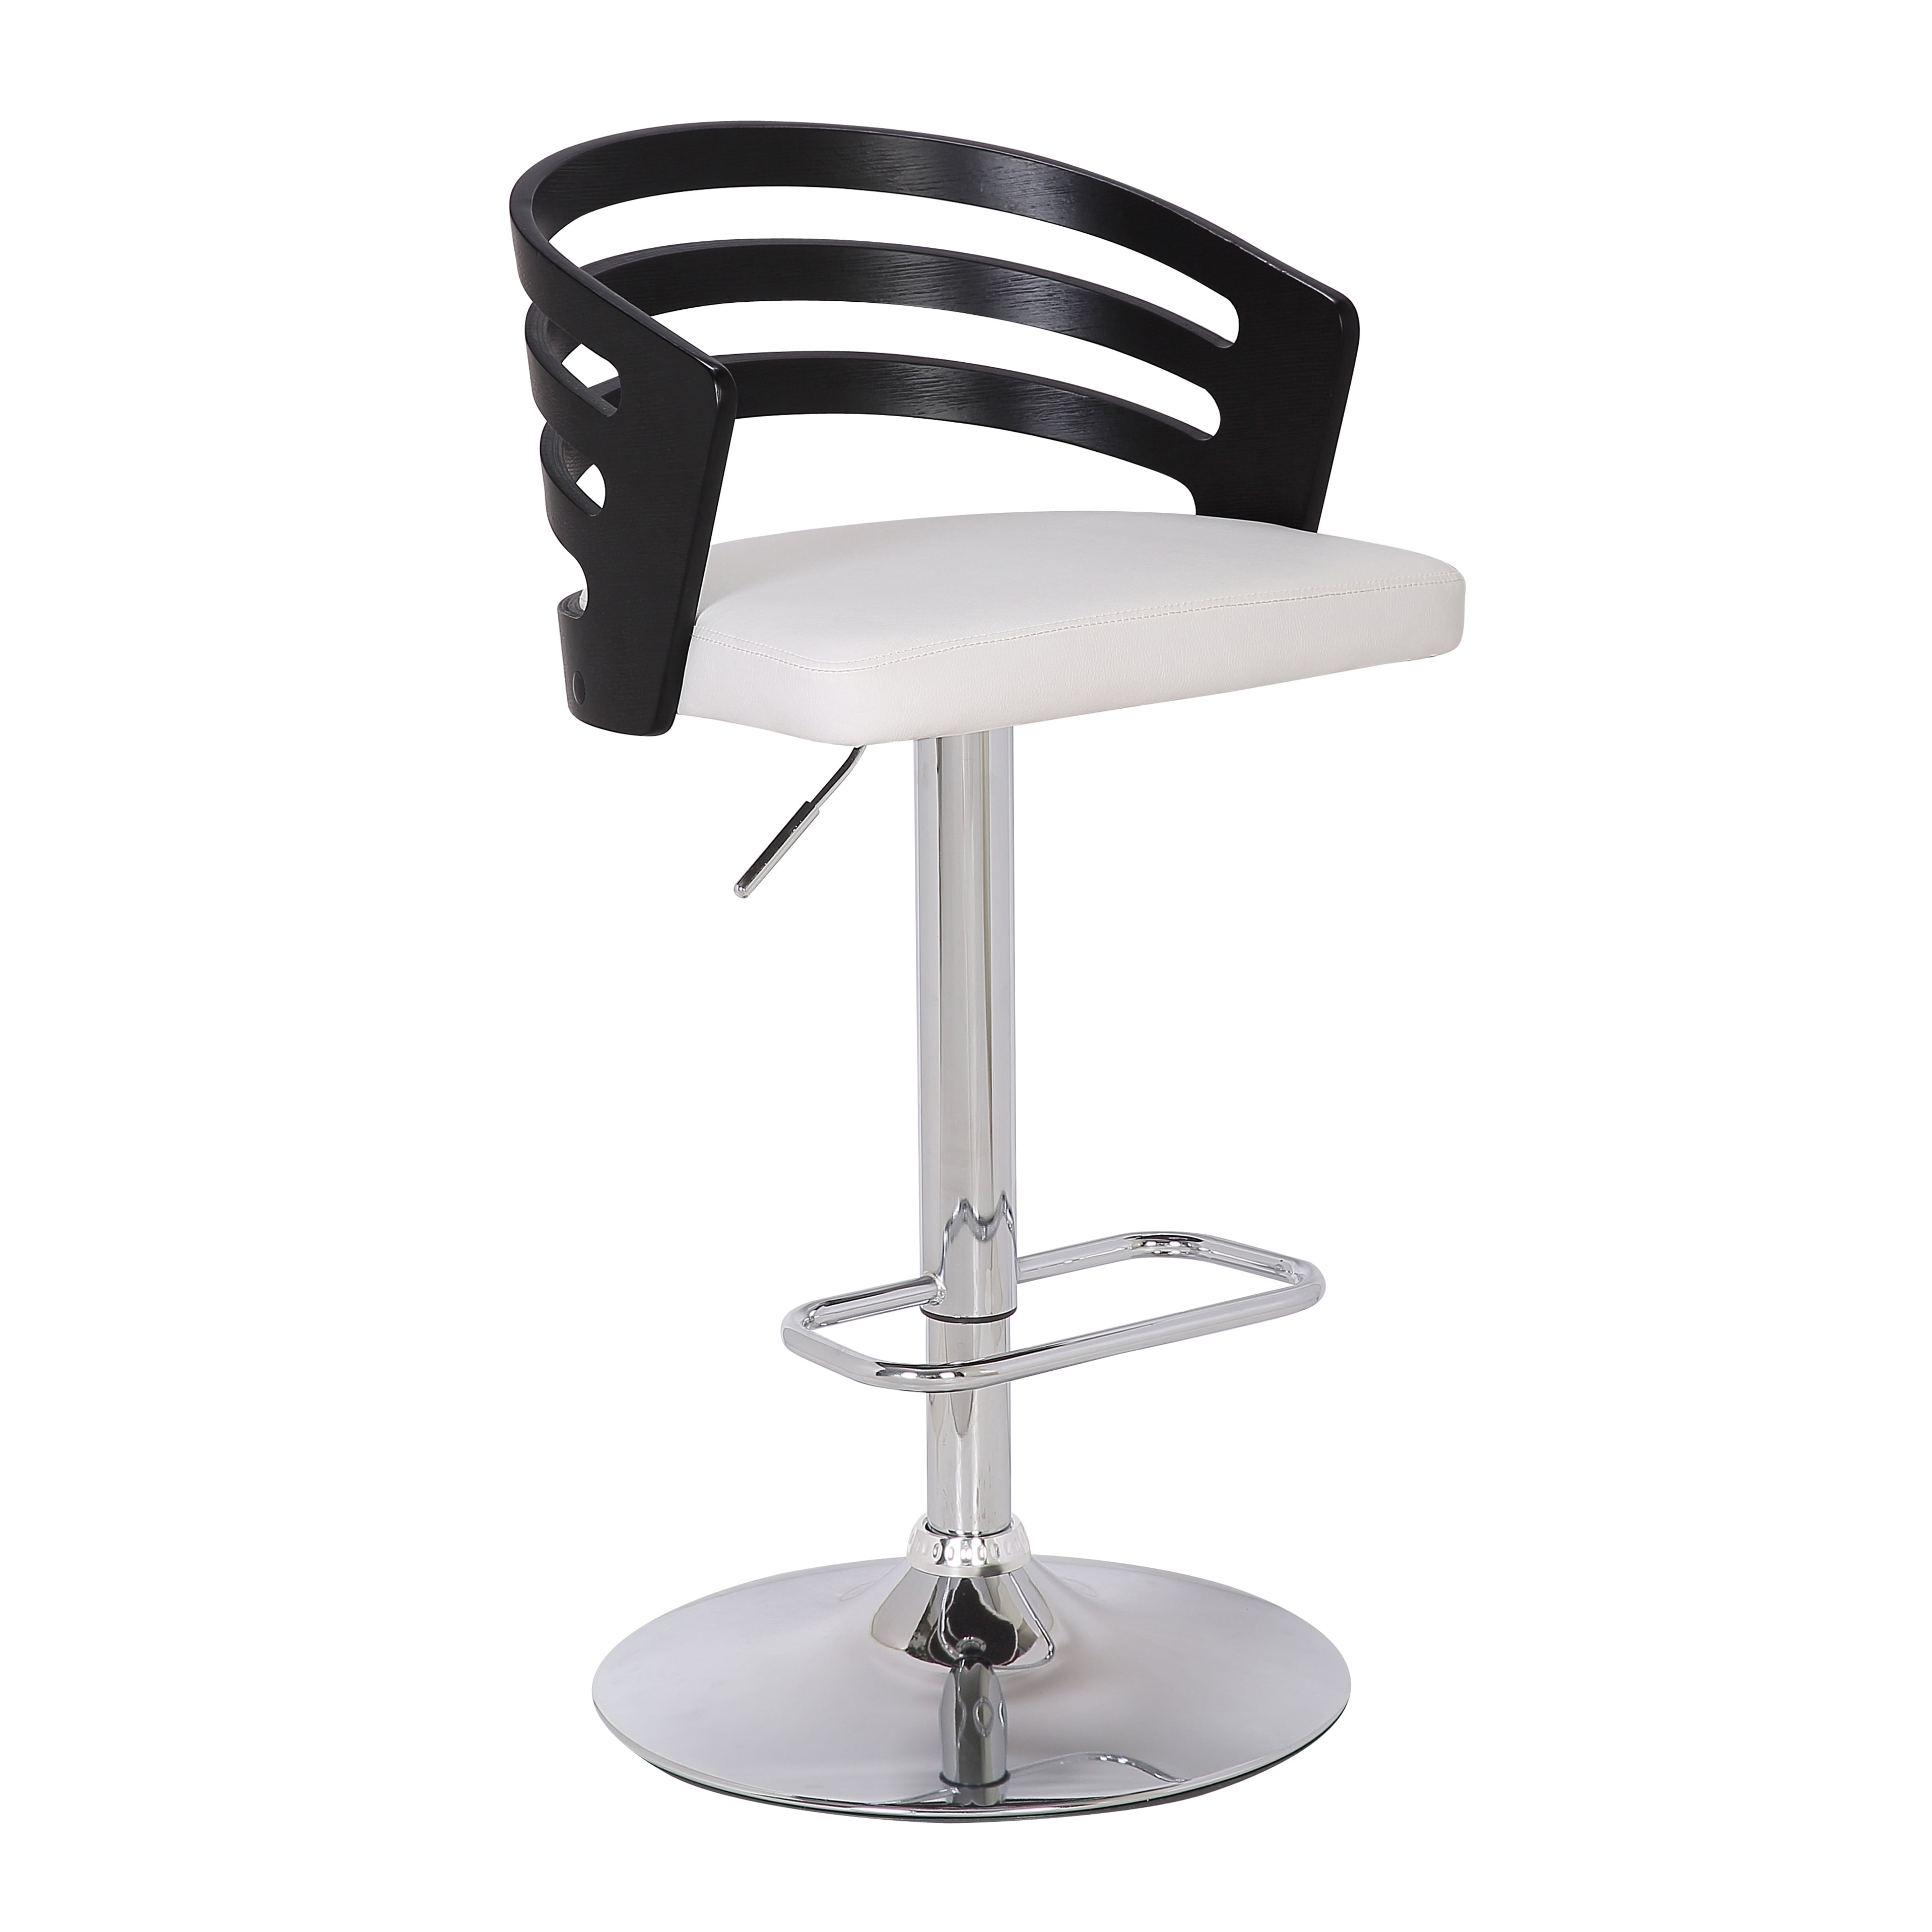 Contemporary Adjustable Bar Stools For Modern Kitchens